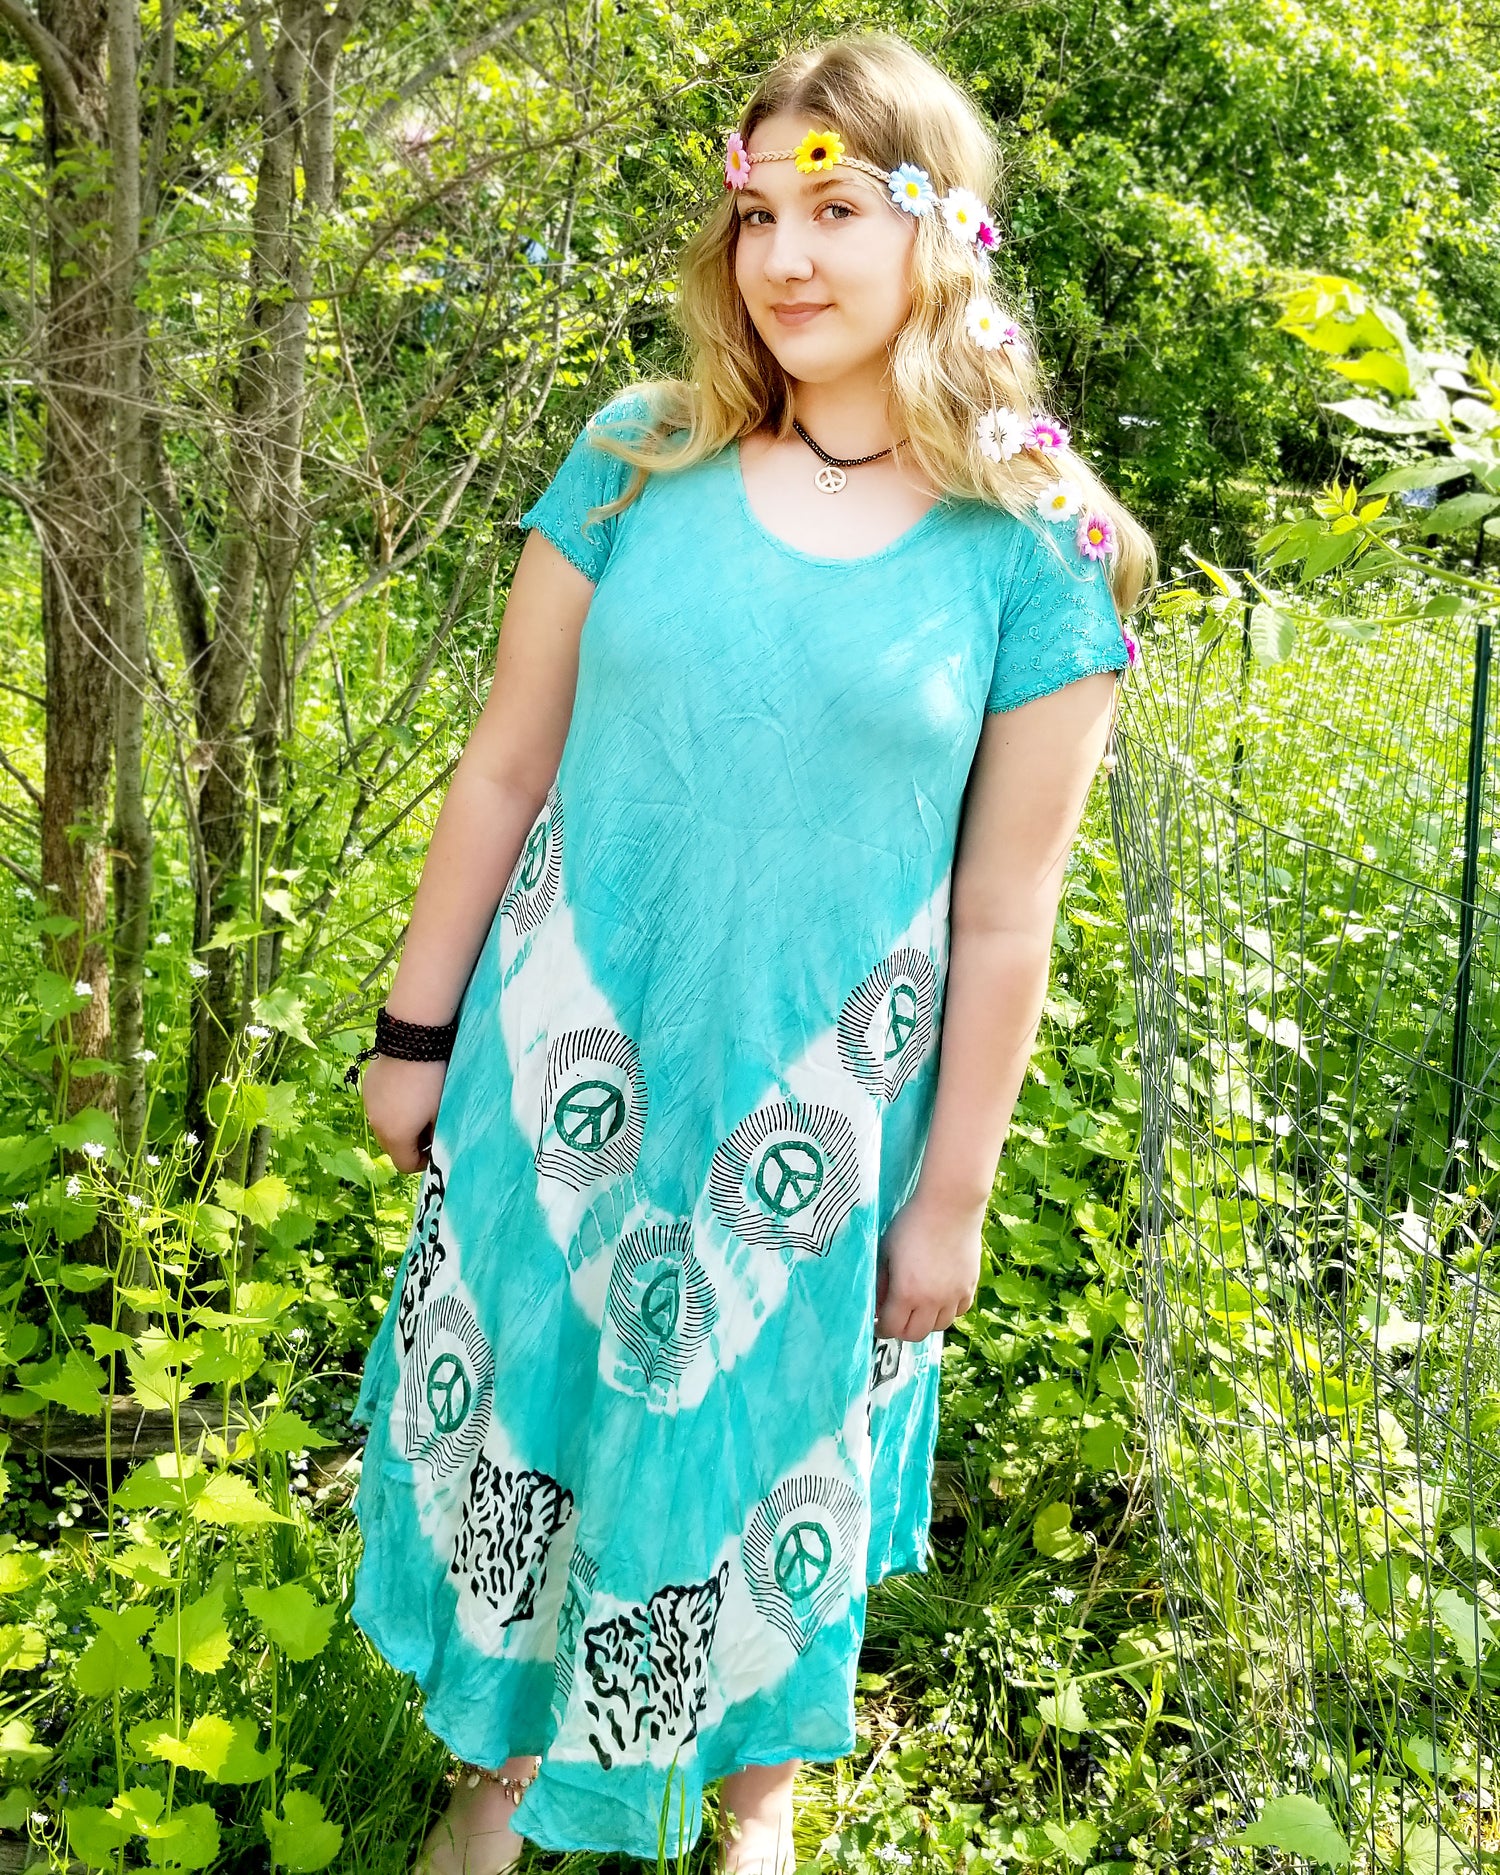 teal peace sign summer dress for women at the boho hippie hut 